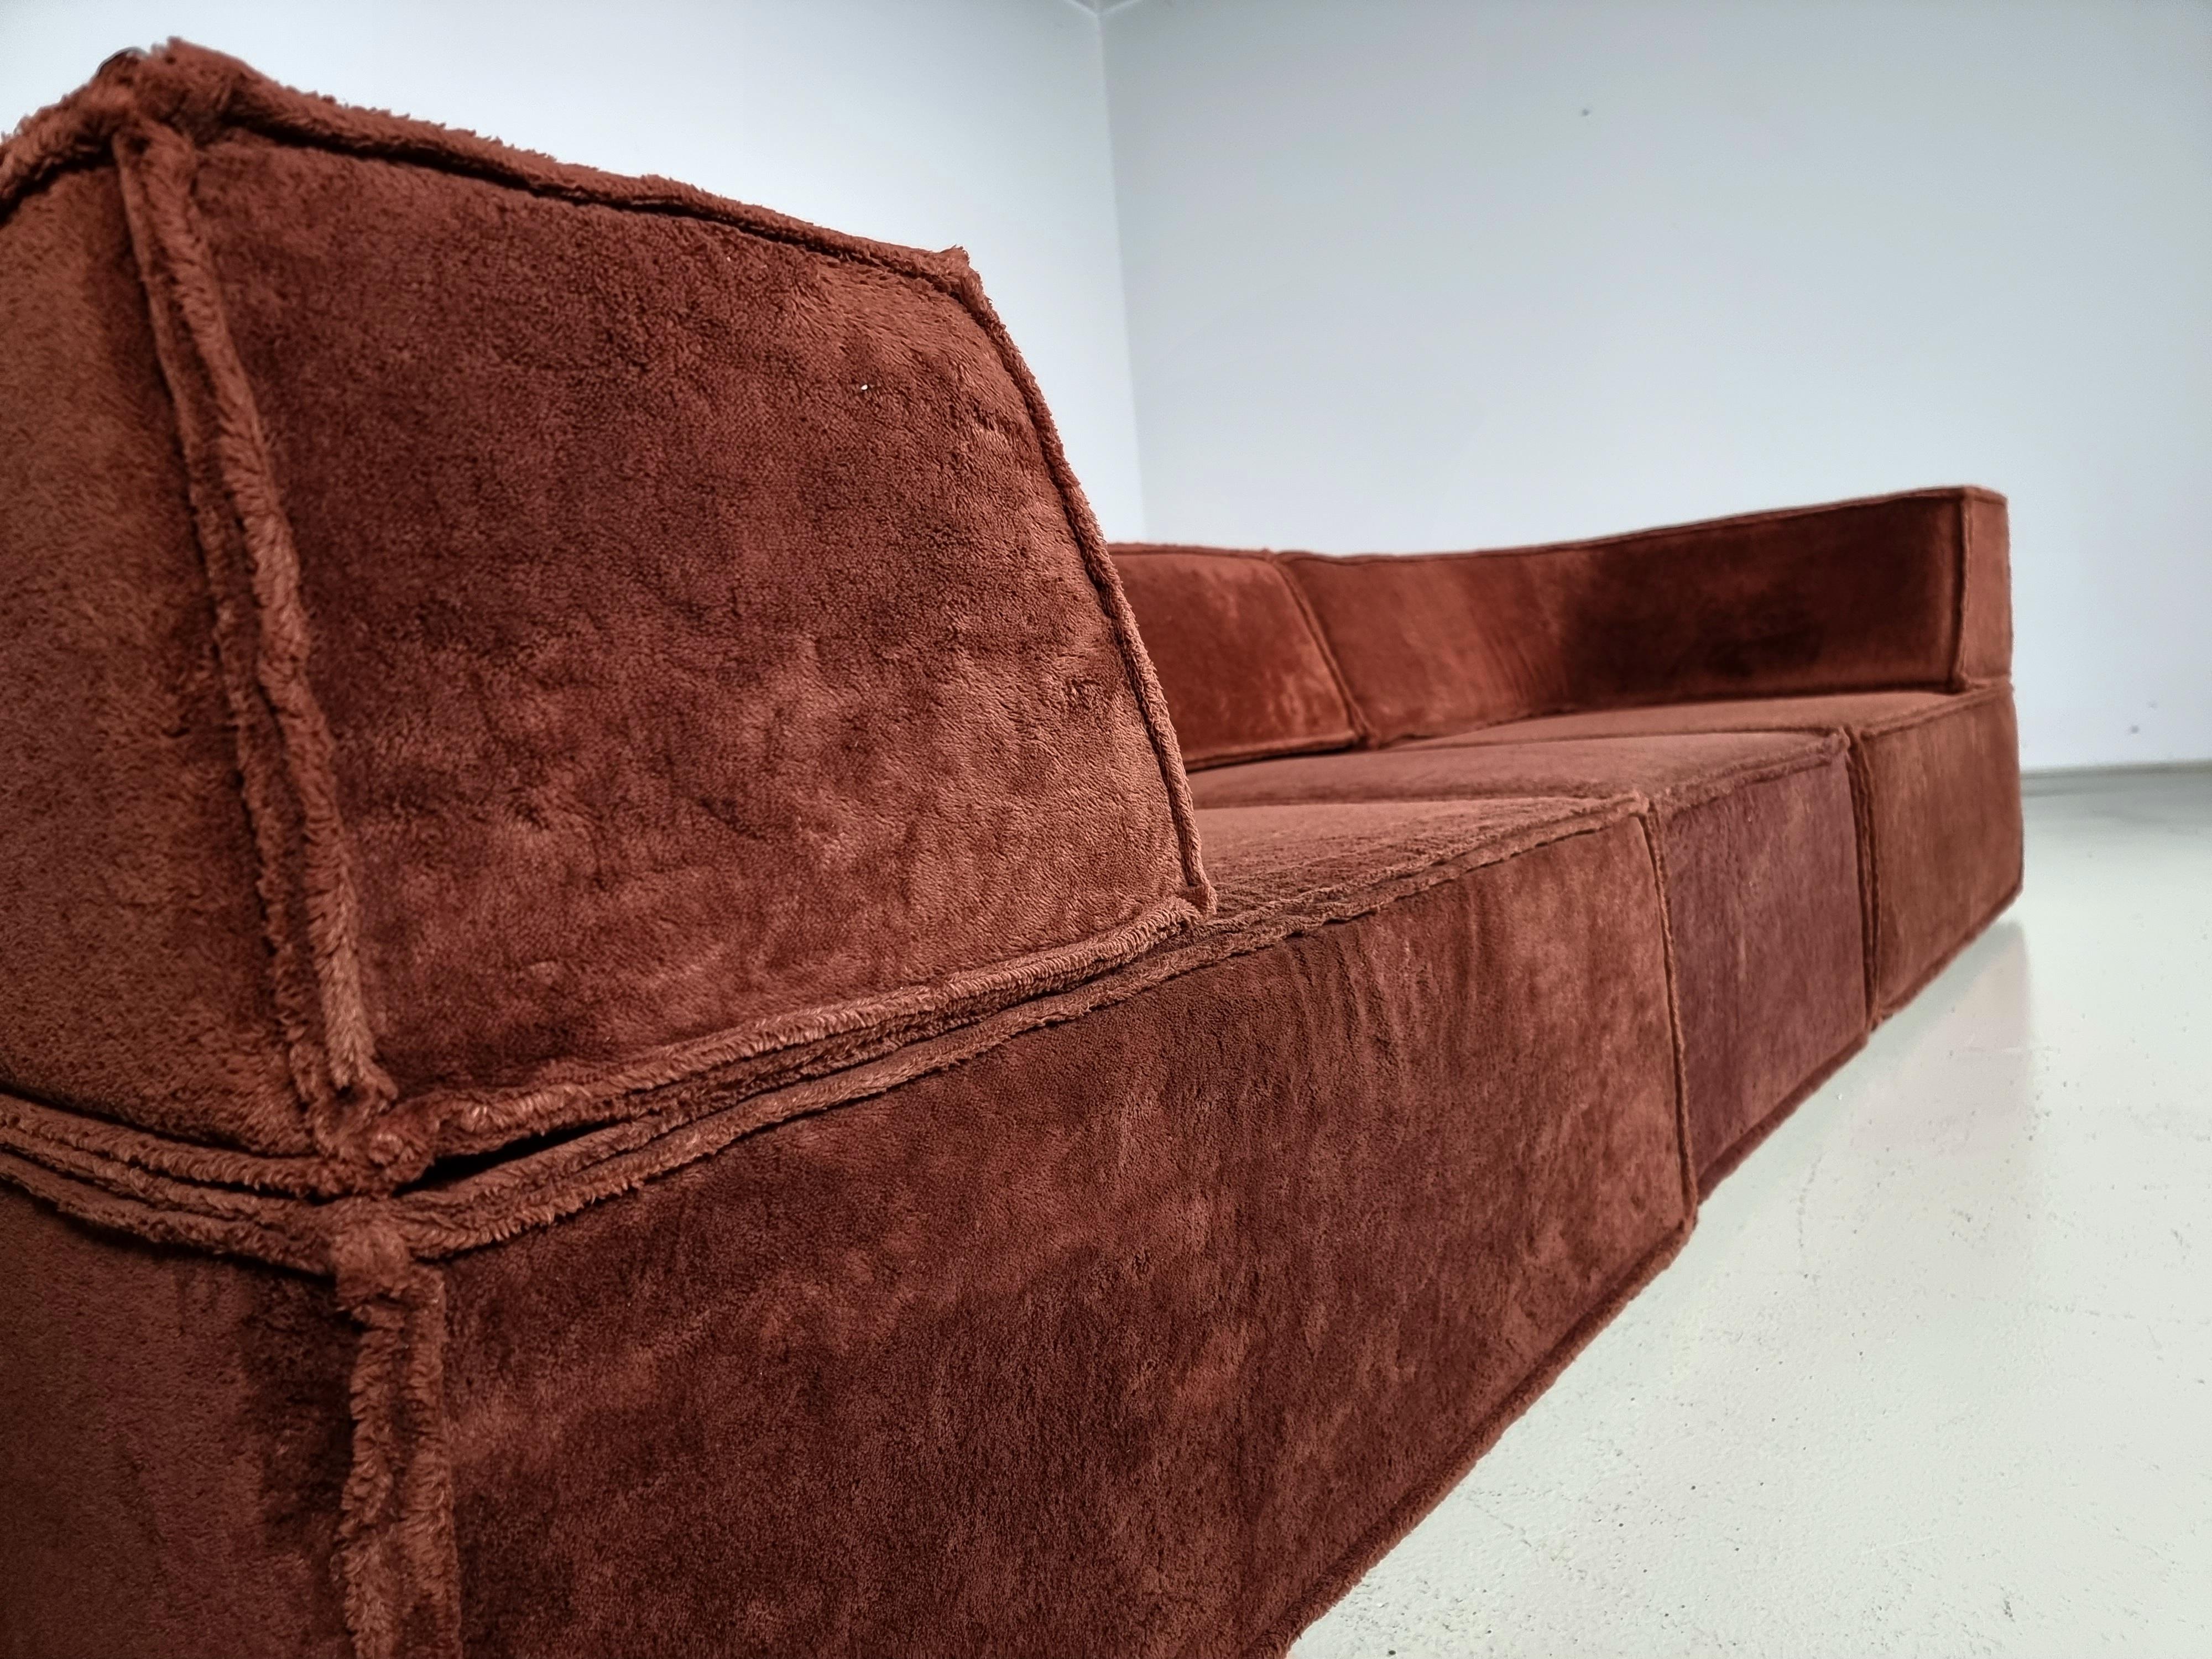 Fabric COR Trio Sofa by Team Form Ag in brown original fabric, COR Furniture, Germany